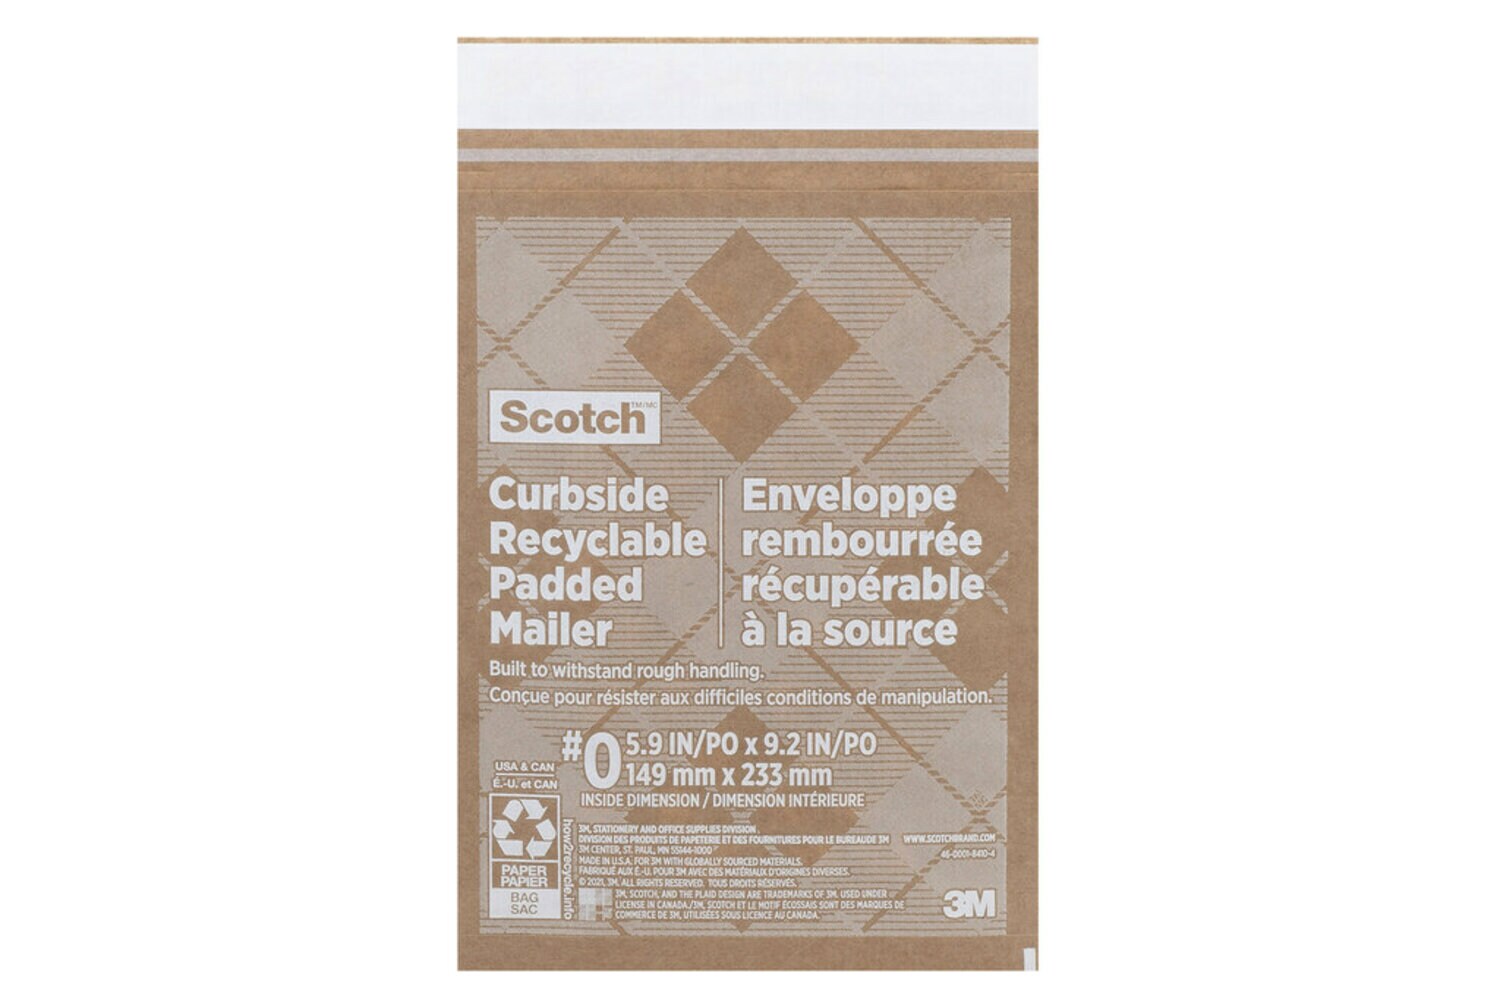 7100258035 - Scotch Curbside Recyclable Padded Mailer CR-0-1, 5.5 in x 9 in (139 mm x 228 mm), Size 0